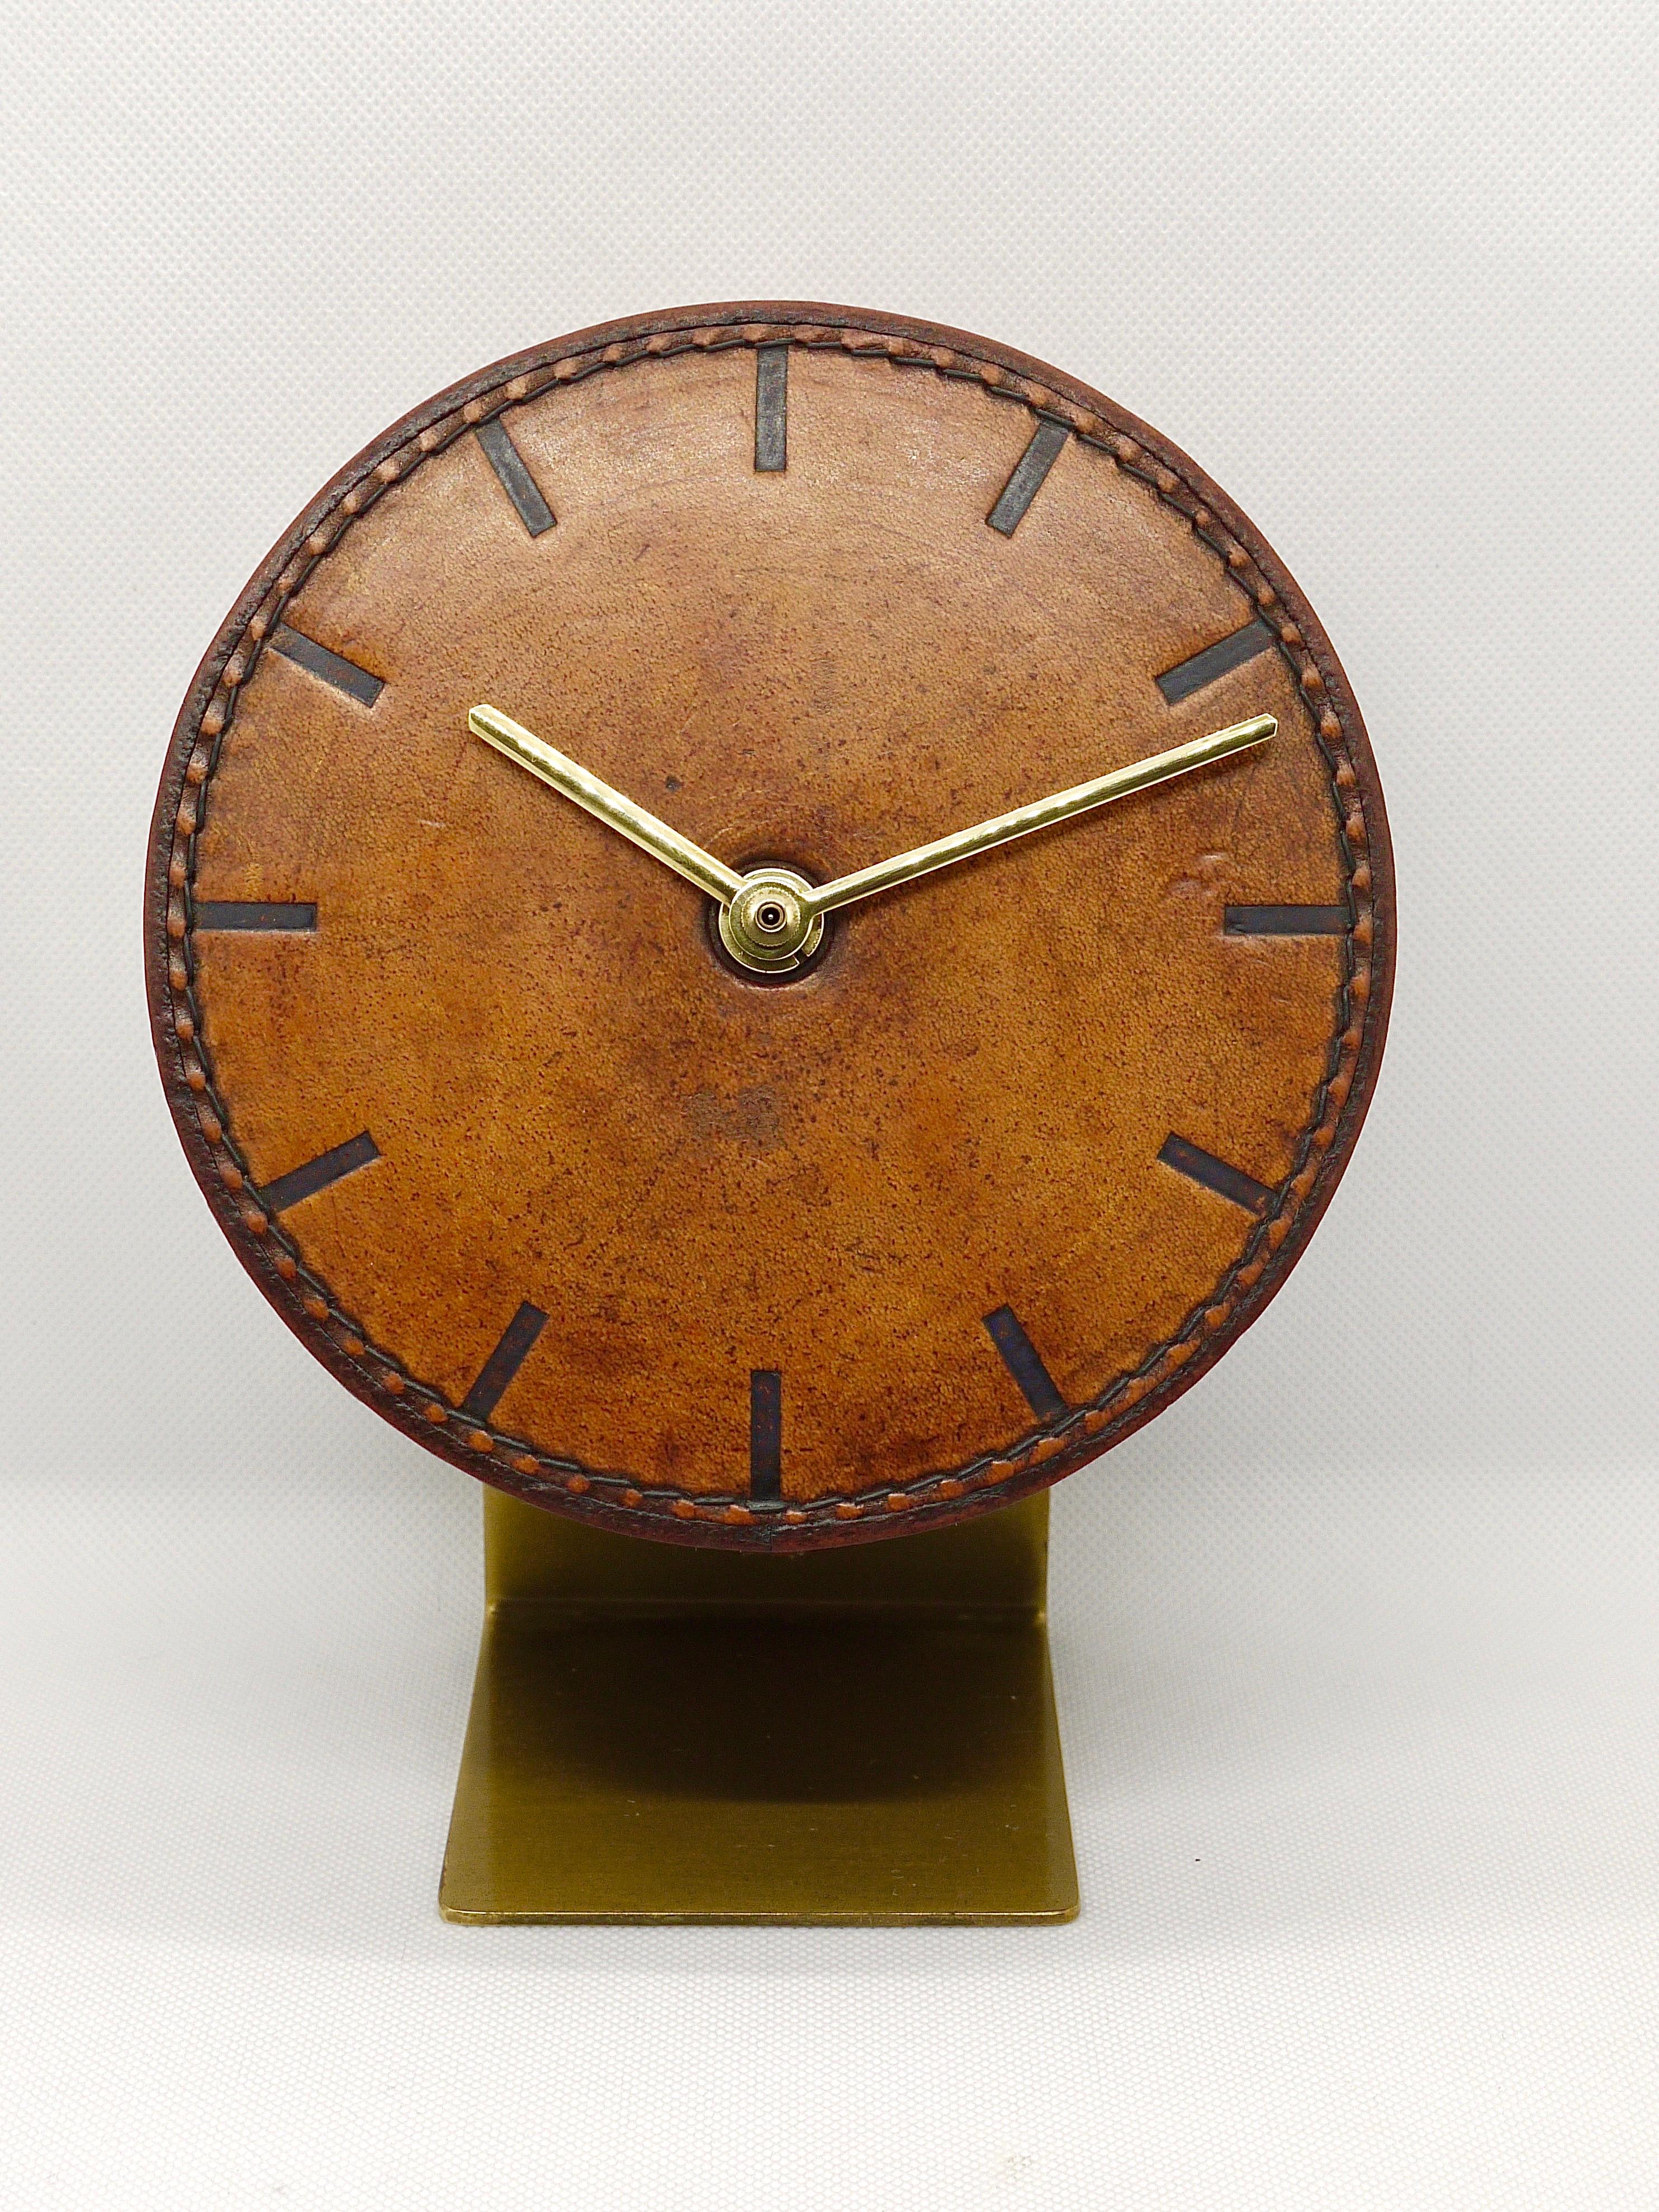 A beautiful leather and brass modernist clock from the 1950s, designed and executed by Carl Auböck, Vienna/Austria. An amazing straight-lined clock, has a leather covered clocks face and embossed marks for each hour. Battery-operated movement. Very